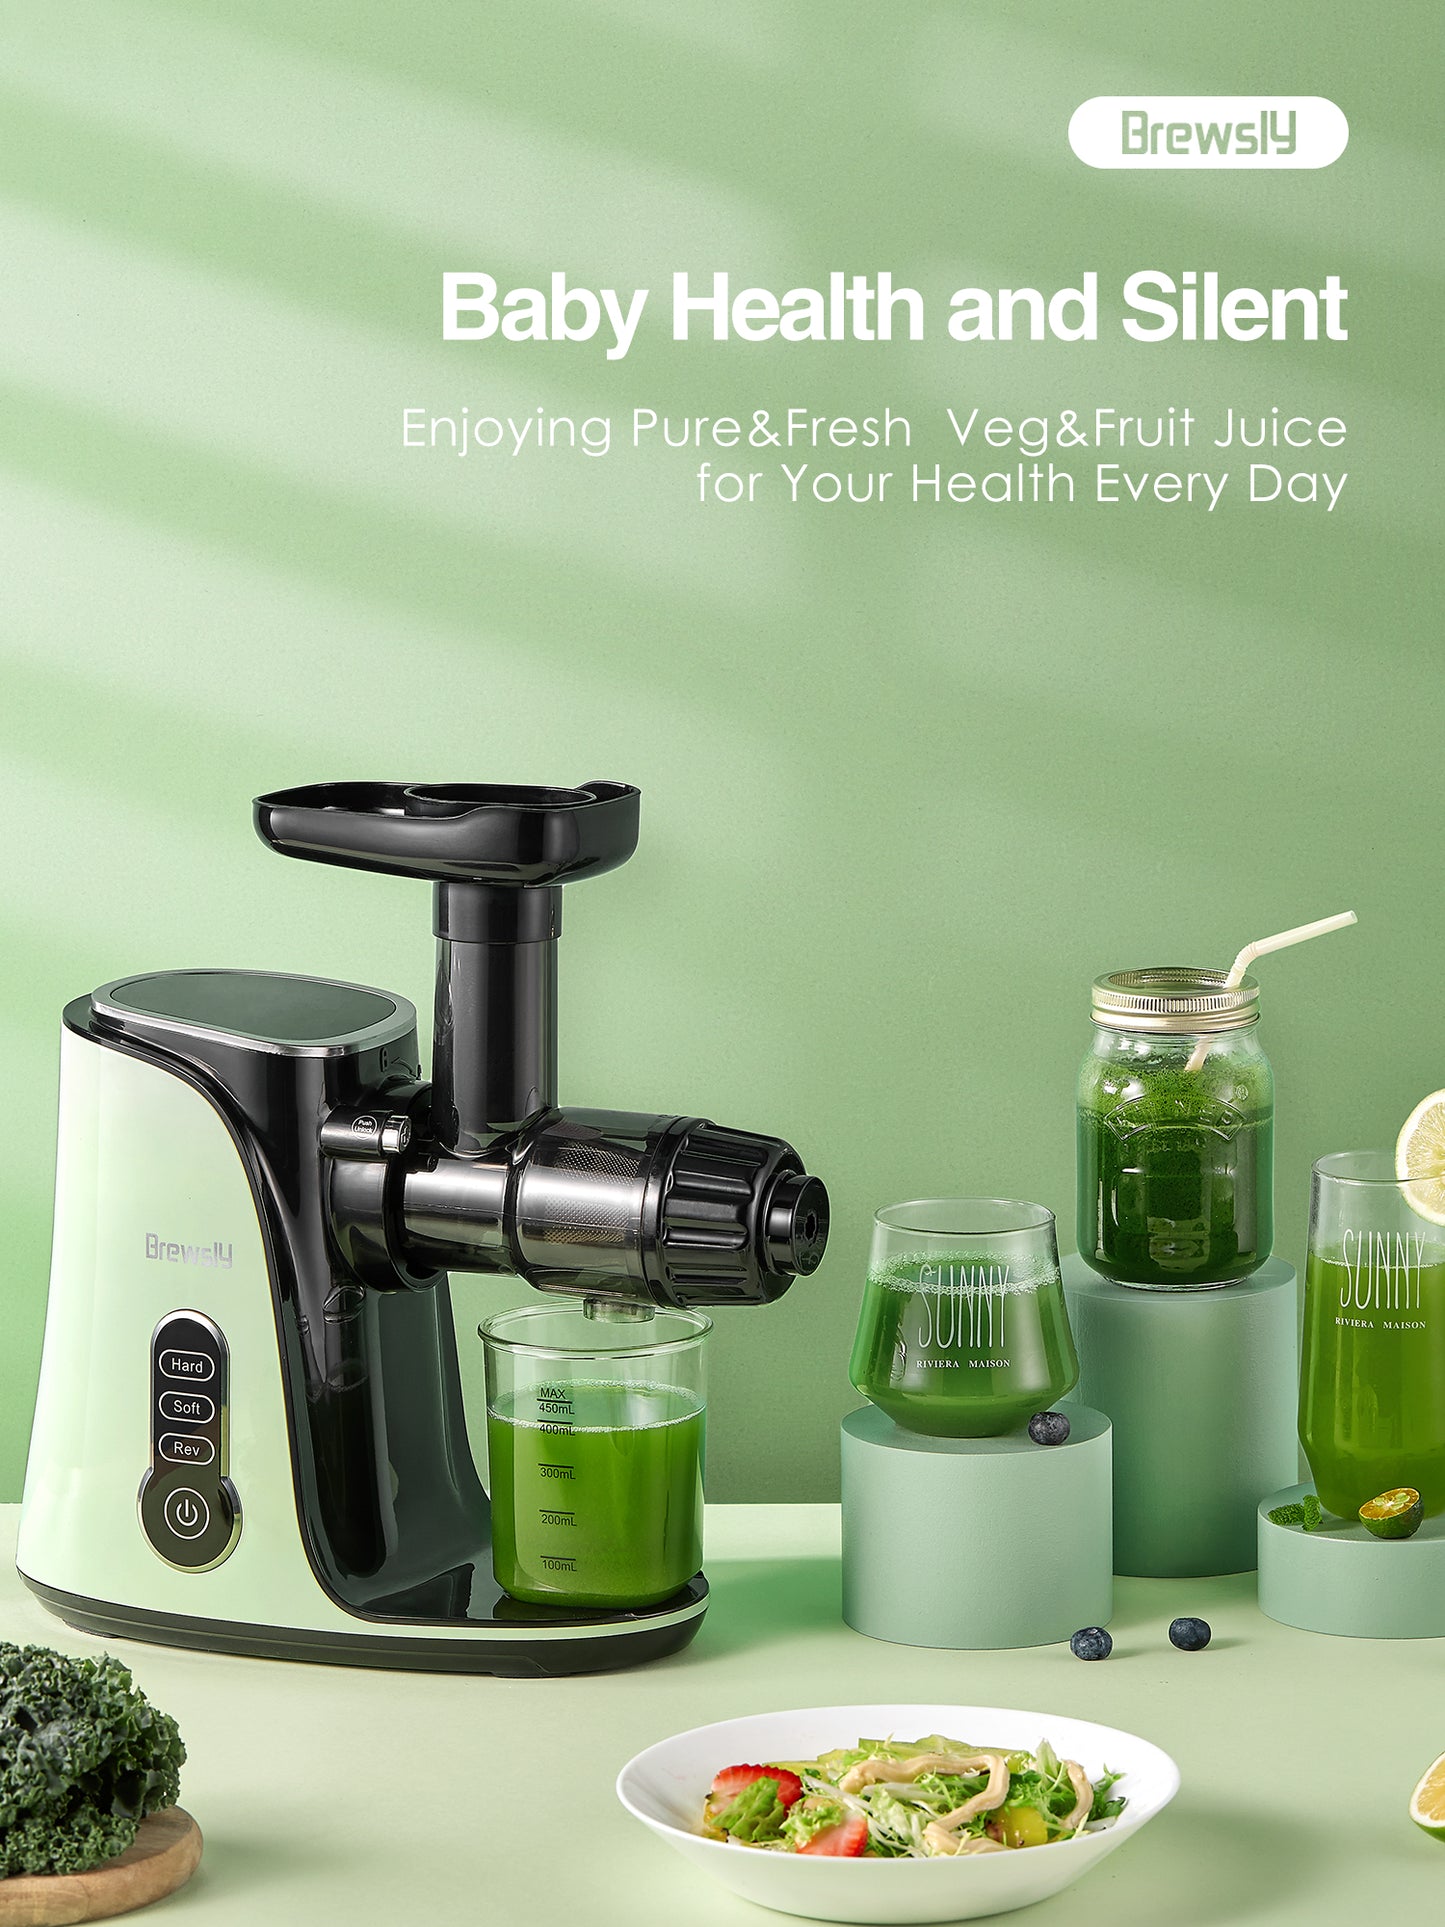 Juicer Machines, Slow Masticating Juicer Extractor with 3-Mode 2-Speed, Cold Press Juicer Easy to Clean, Quiet Motor & Reverse Function, Juice Recipes for Vegetables and Fruits, Green